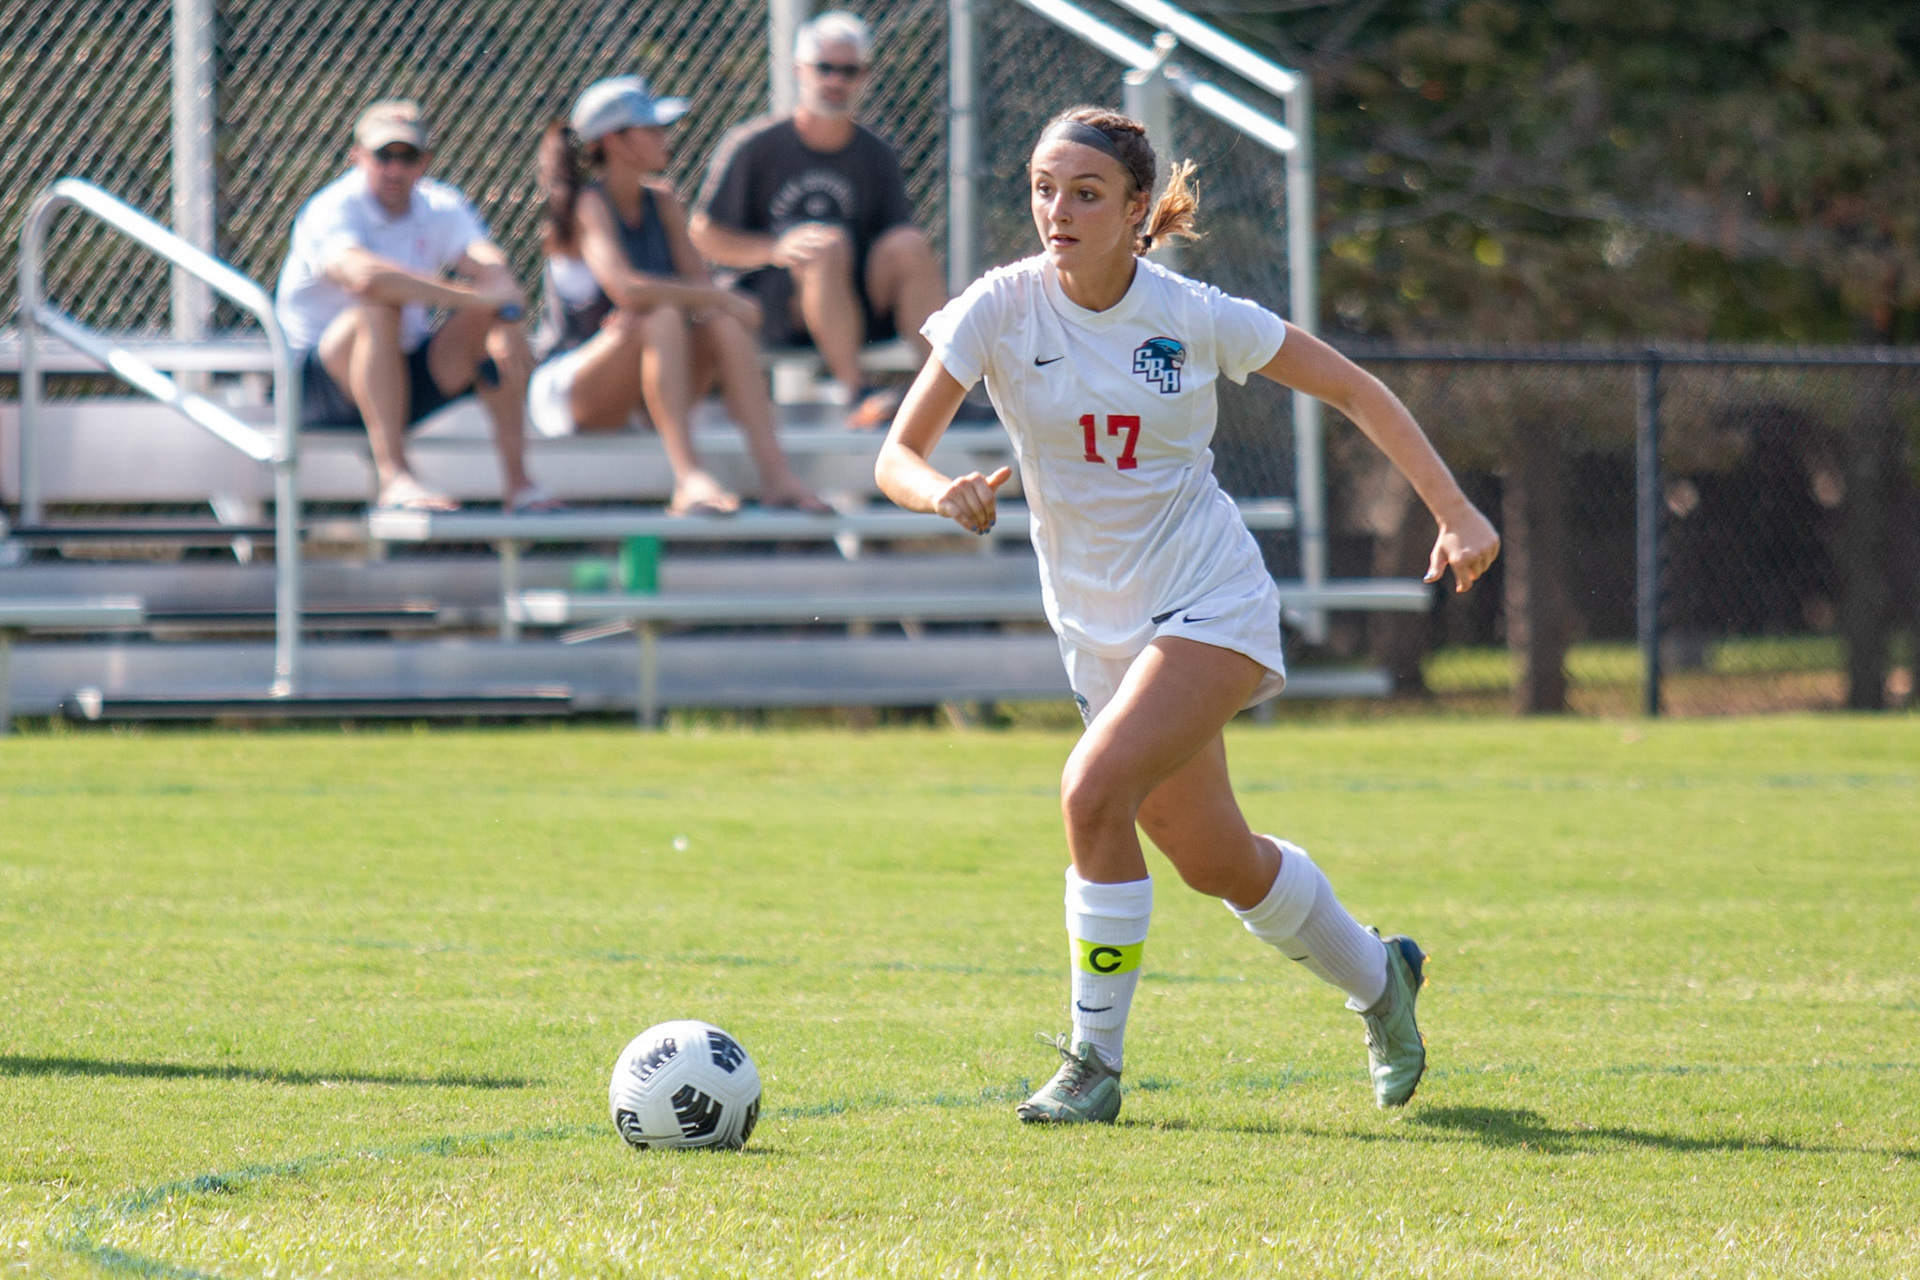 Kylie O'Connor advances the ball up the field. (Photo by Ryan Beatty)